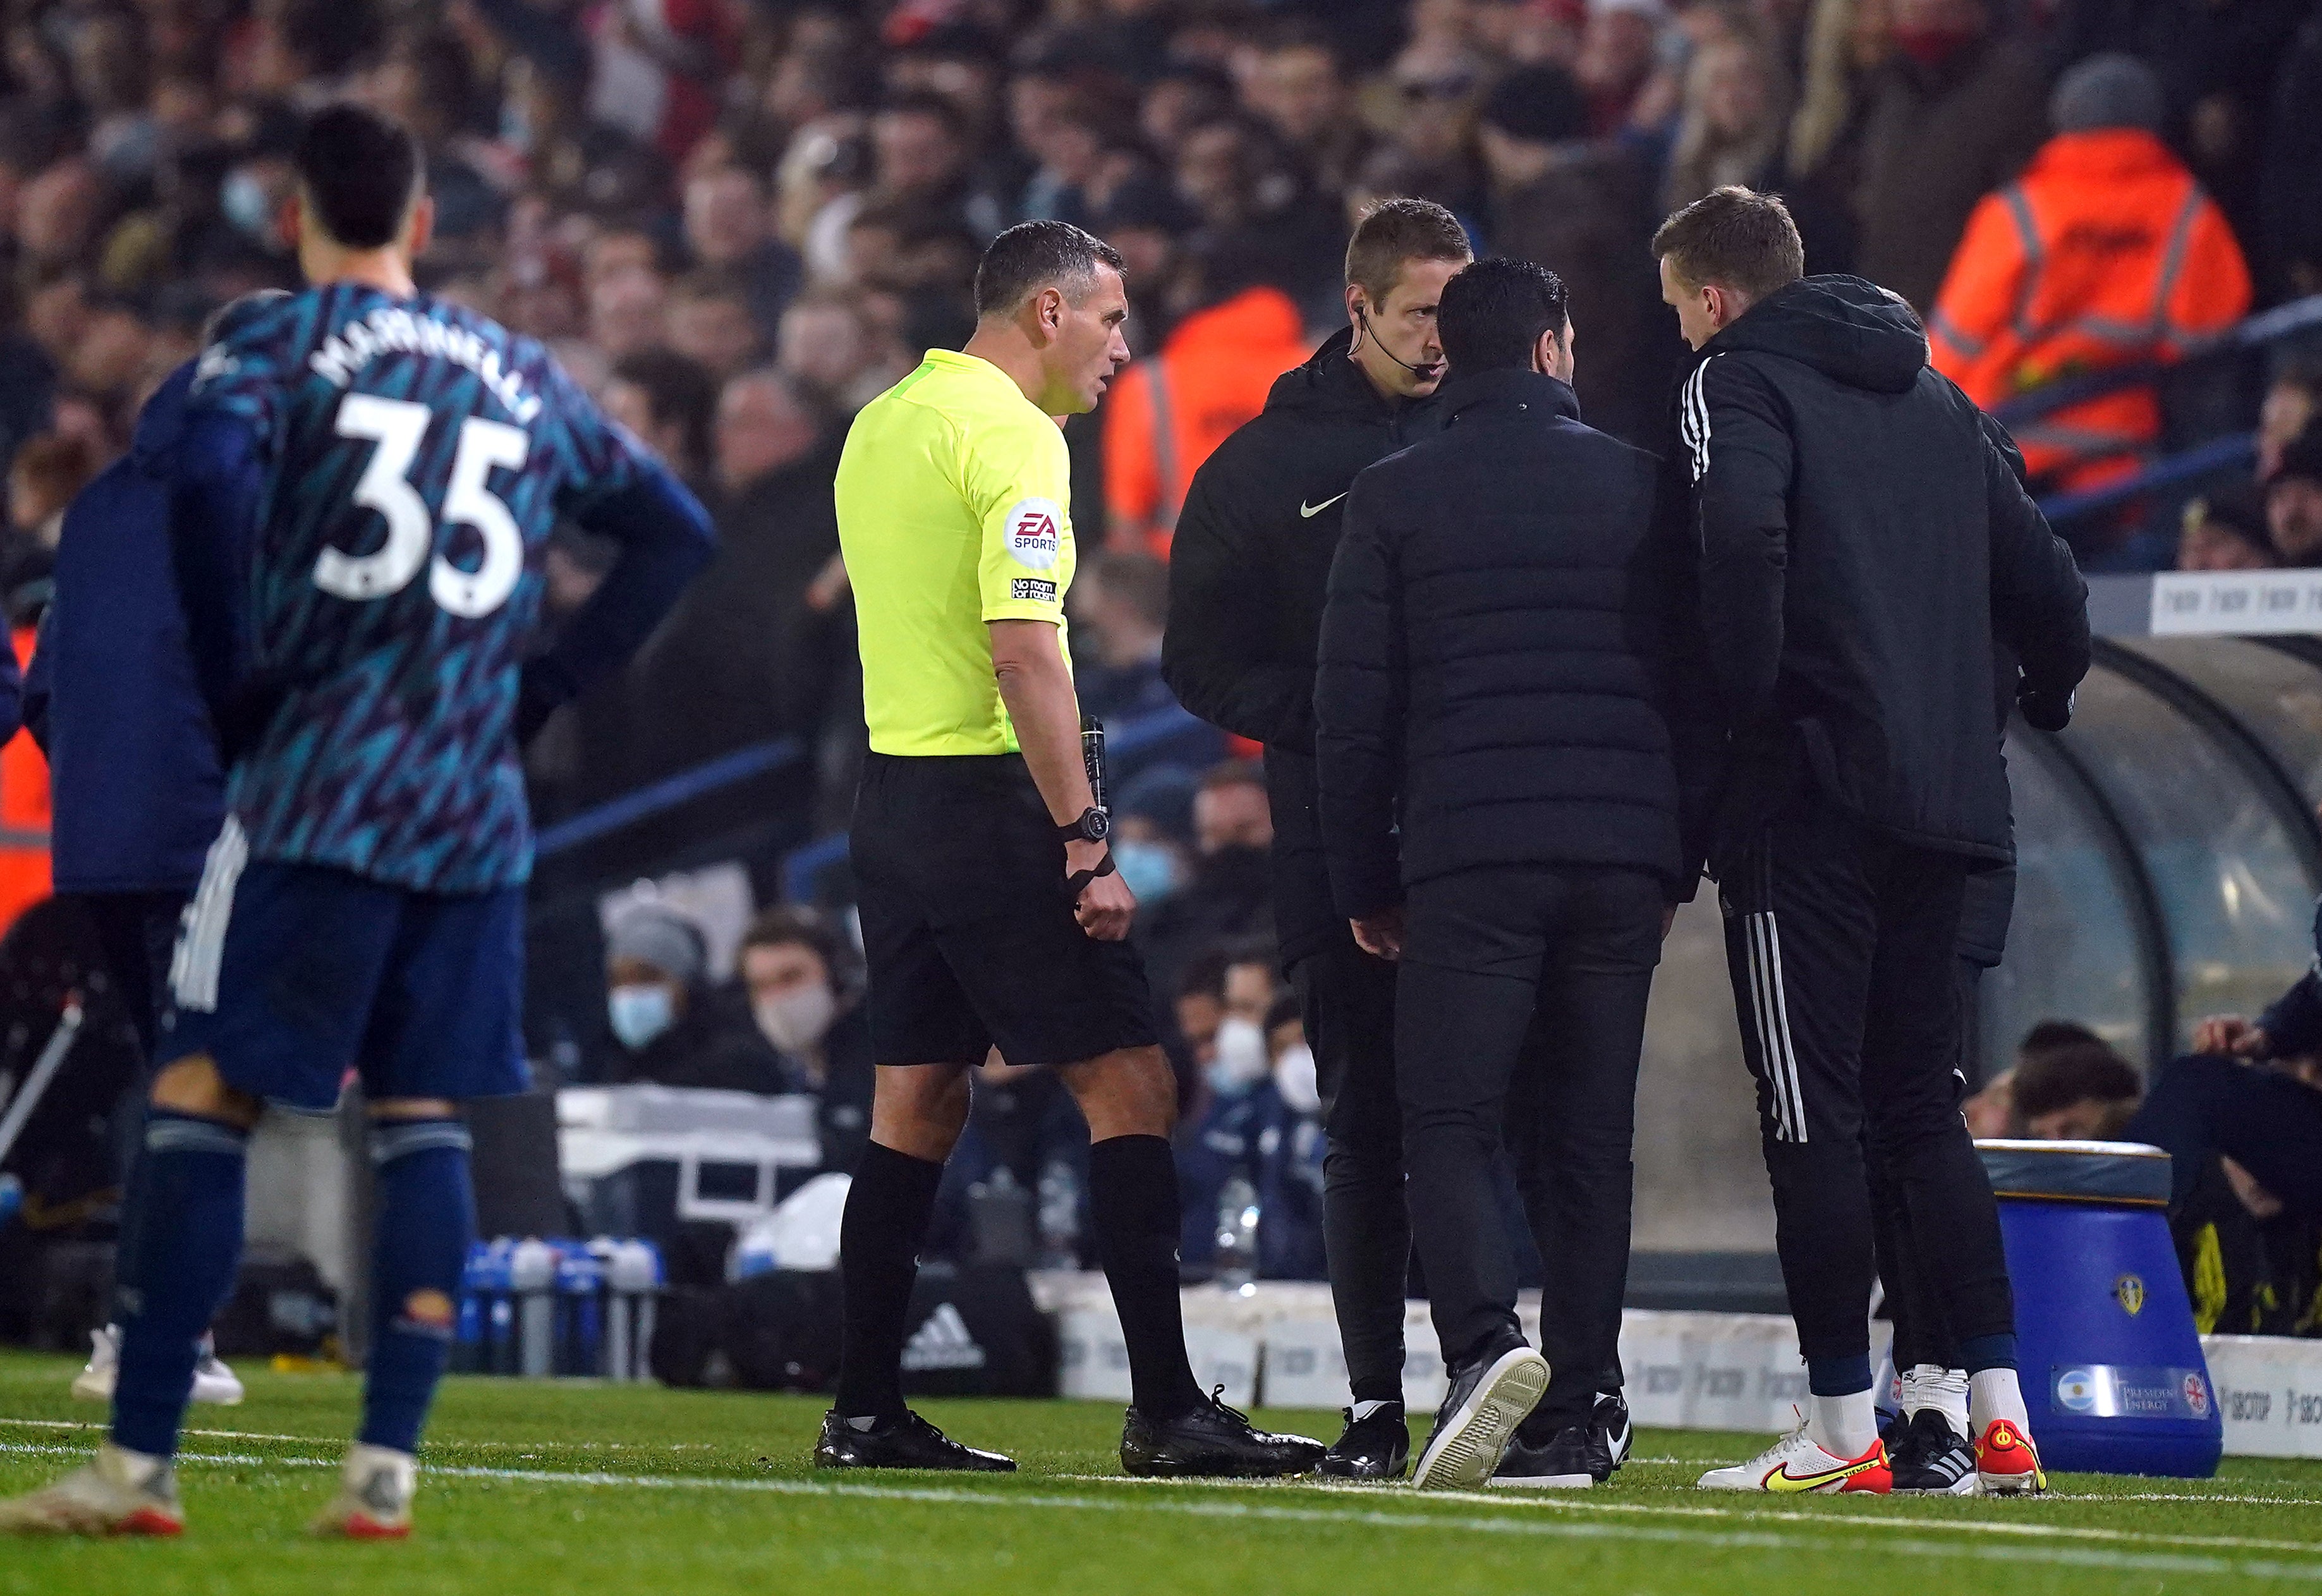 Arsenal manager Mikel Arteta, centre, speaks with referee Andre Marriner, left, and fourth official John Brooks after alleged racist abuse was aimed at the Arsenal bench in Leeds (Mike Egerton/PA)